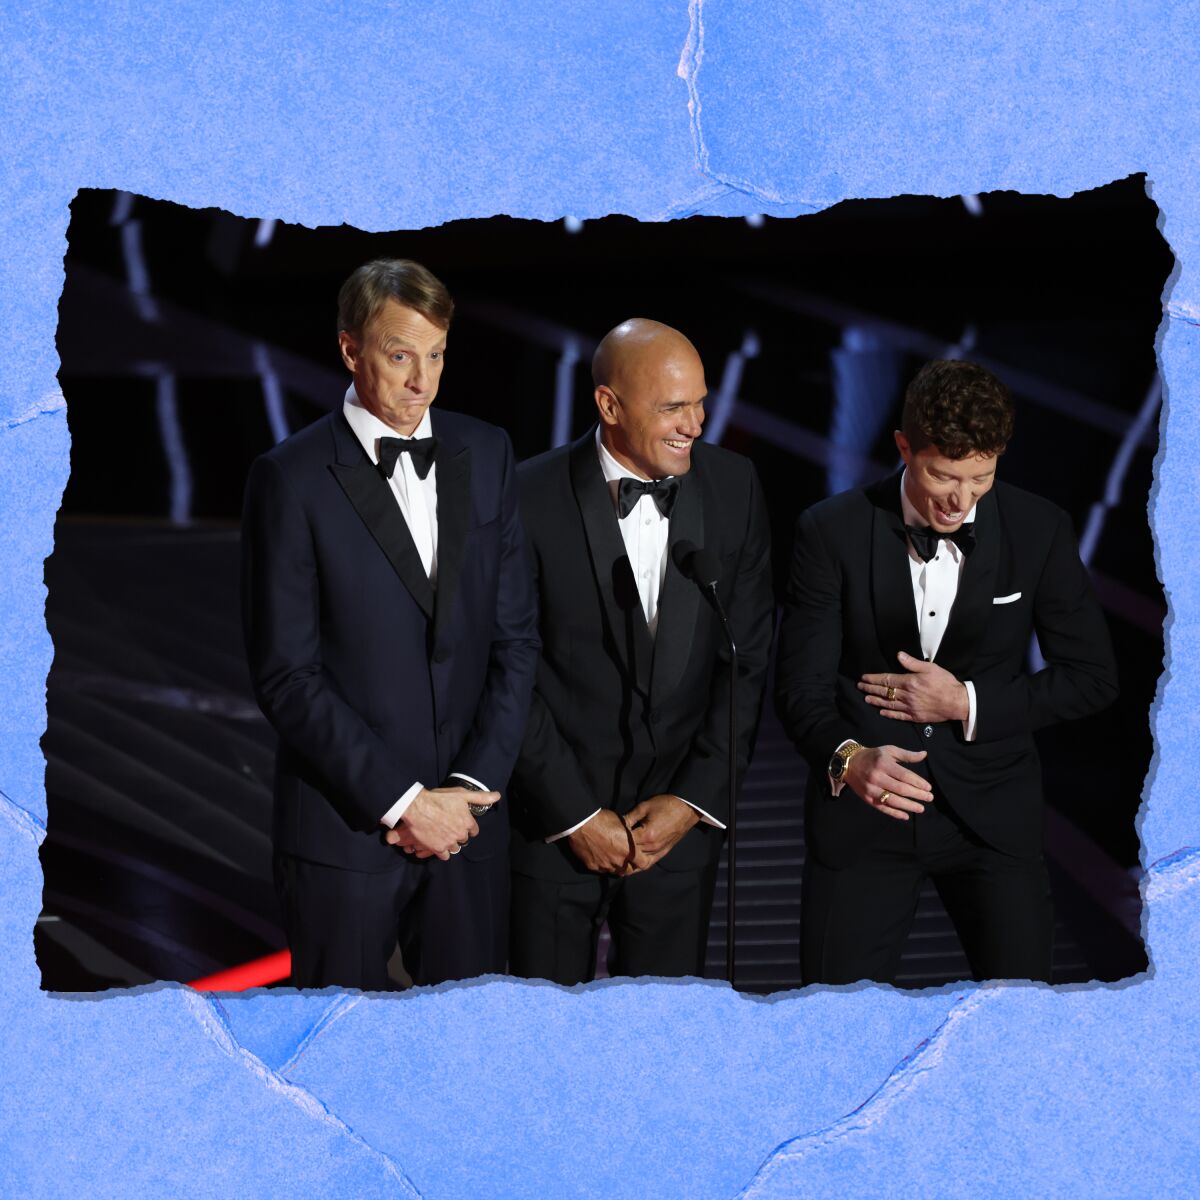 Tony Hawk, Kelly Slater and Shaun White present during the show  at the 94th Academy Awards 